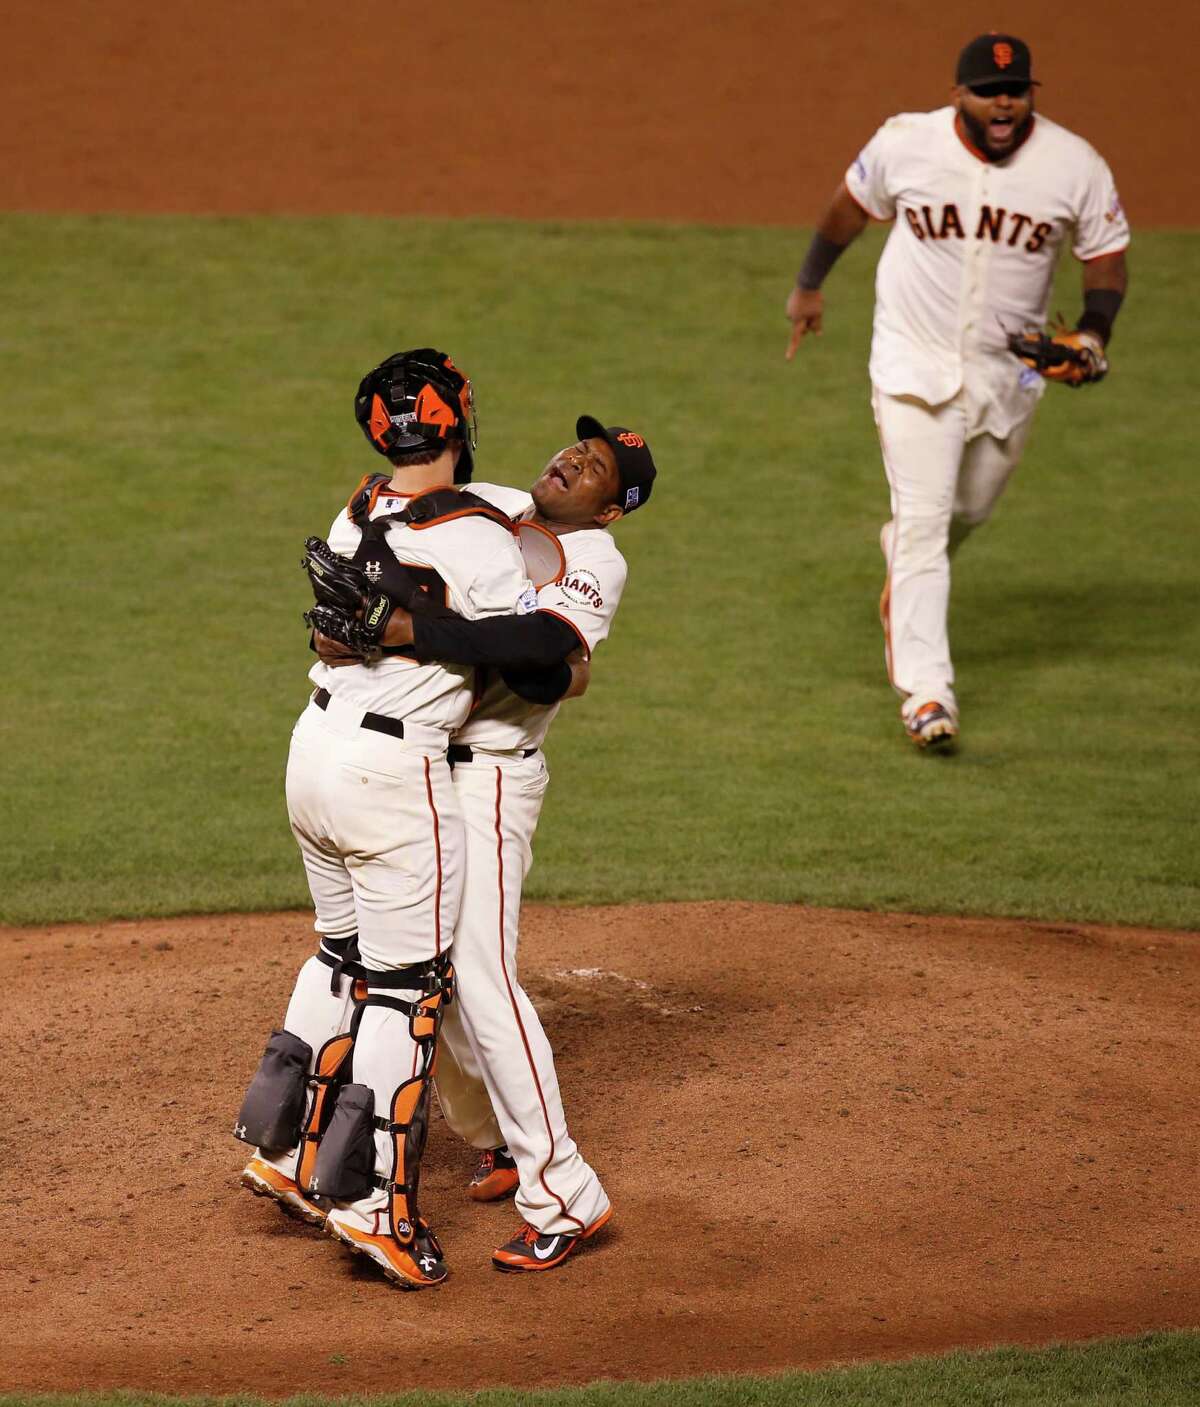 Catcher Buster Posey is lifted by closing pitcher Santiago Casilla after the San Francisco Giants beat the Washington Nationals 3-2 in game four of the National League Division Series at AT&T Park in San Francisco , Calif., on Tuesday Oct. 7, 2014.